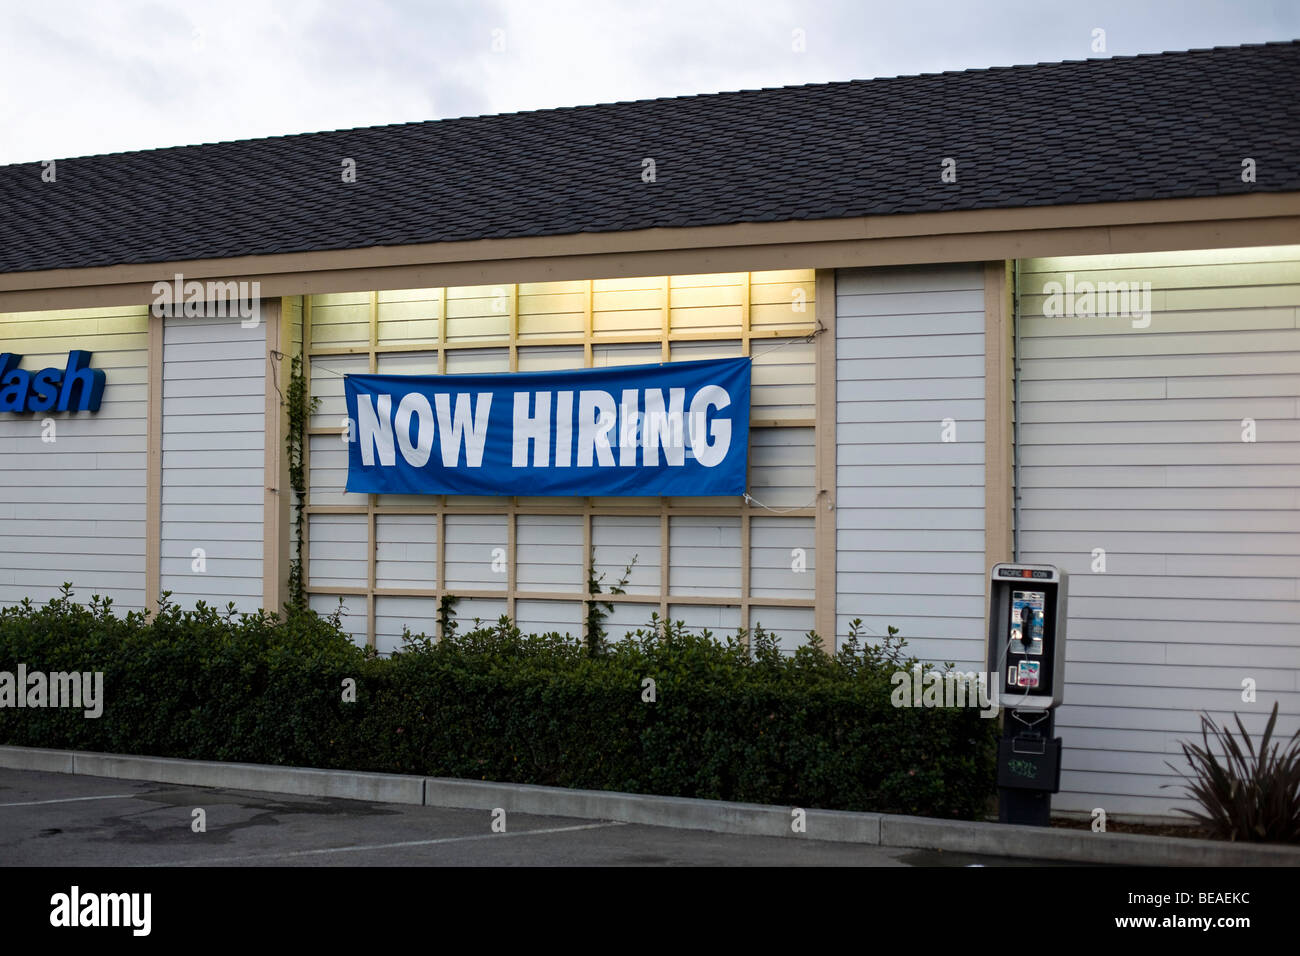 A NOW HIRING sign Stock Photo